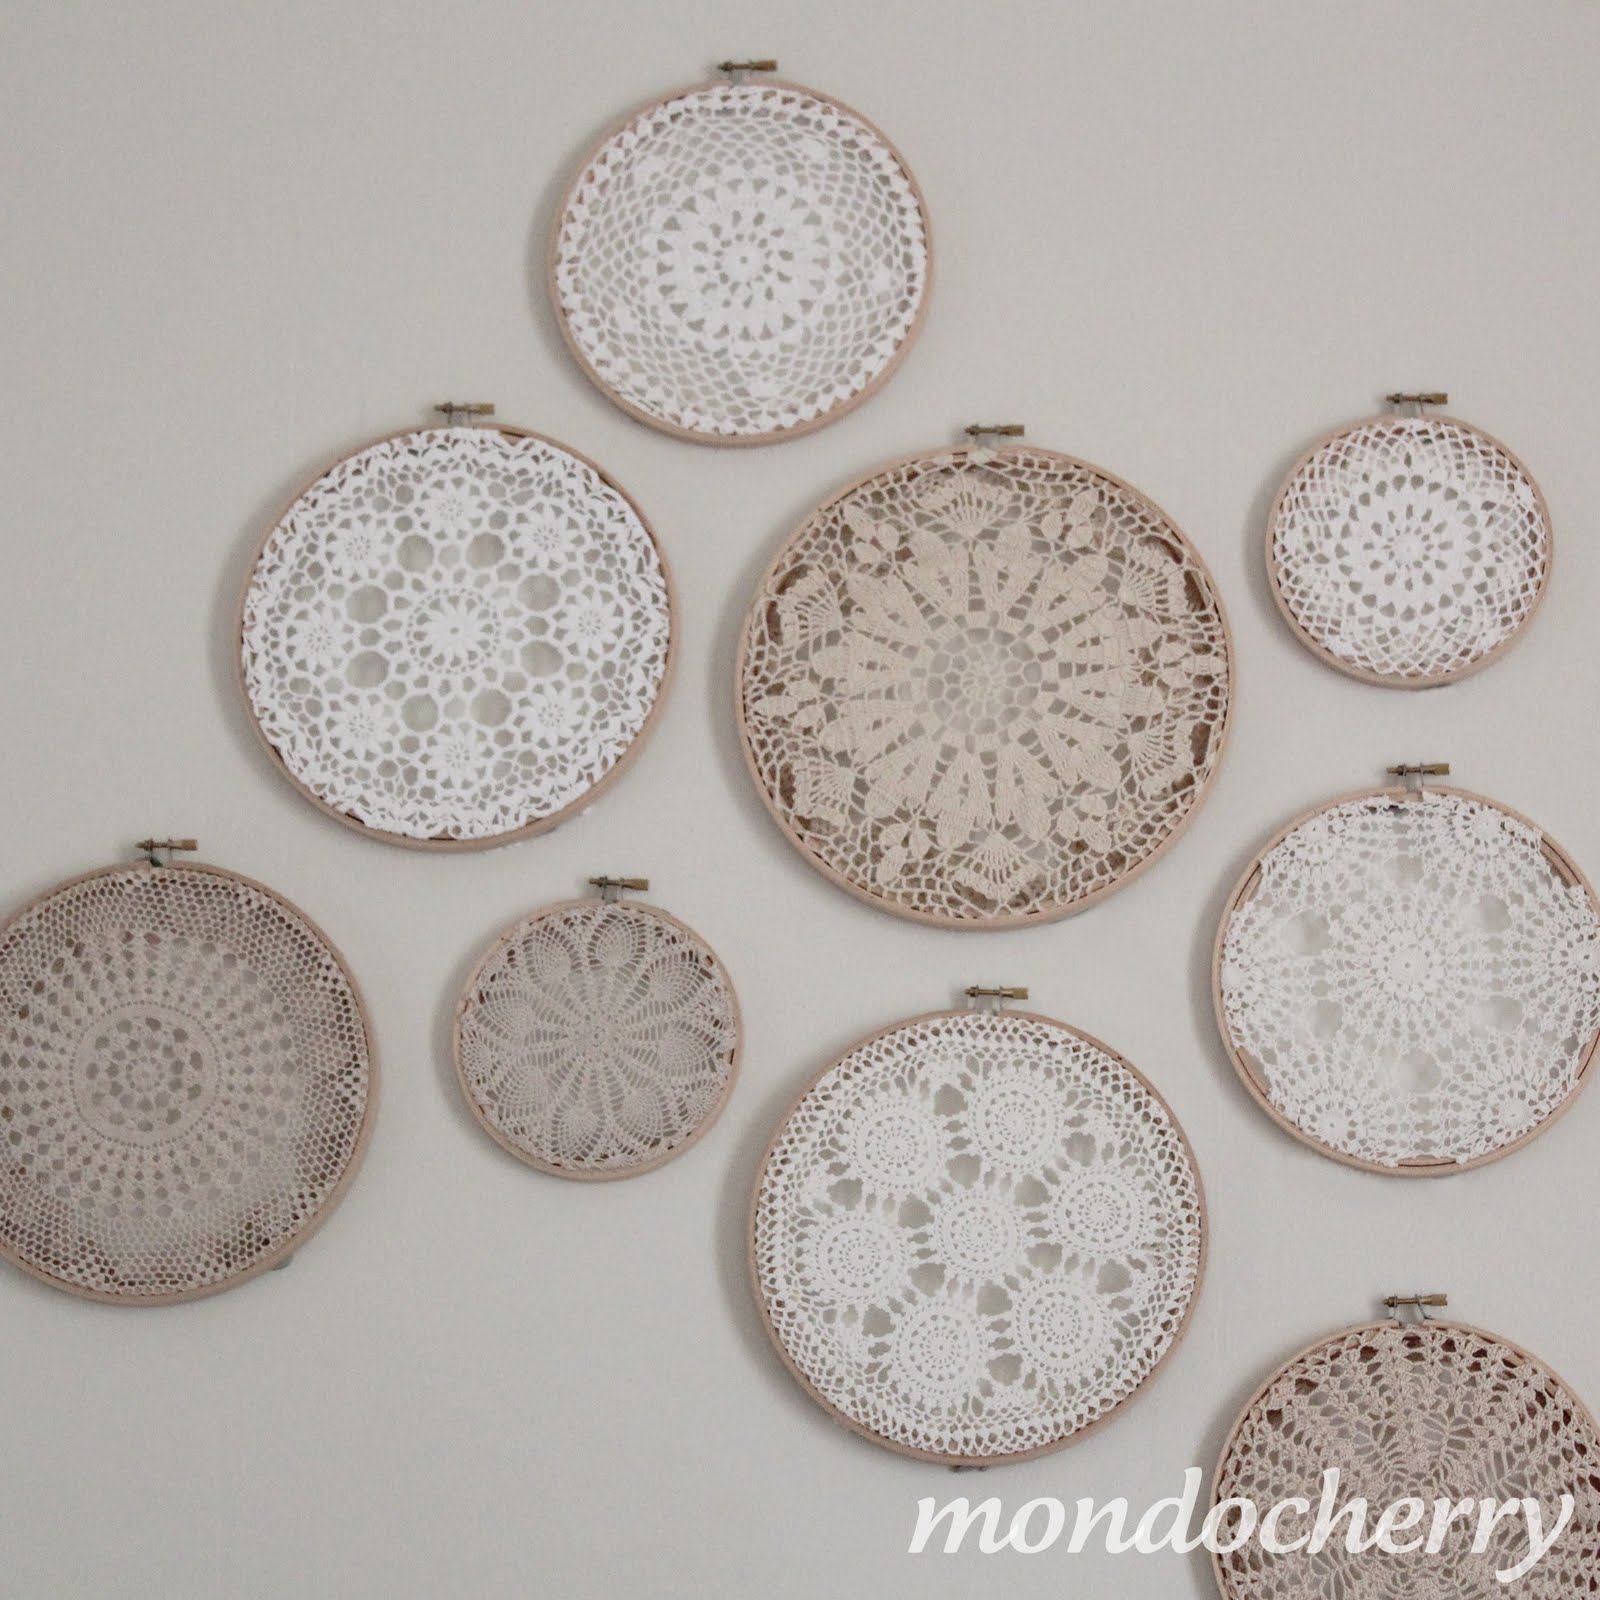 A small bite of mondocherry: embroidery hoops + doilies = art...